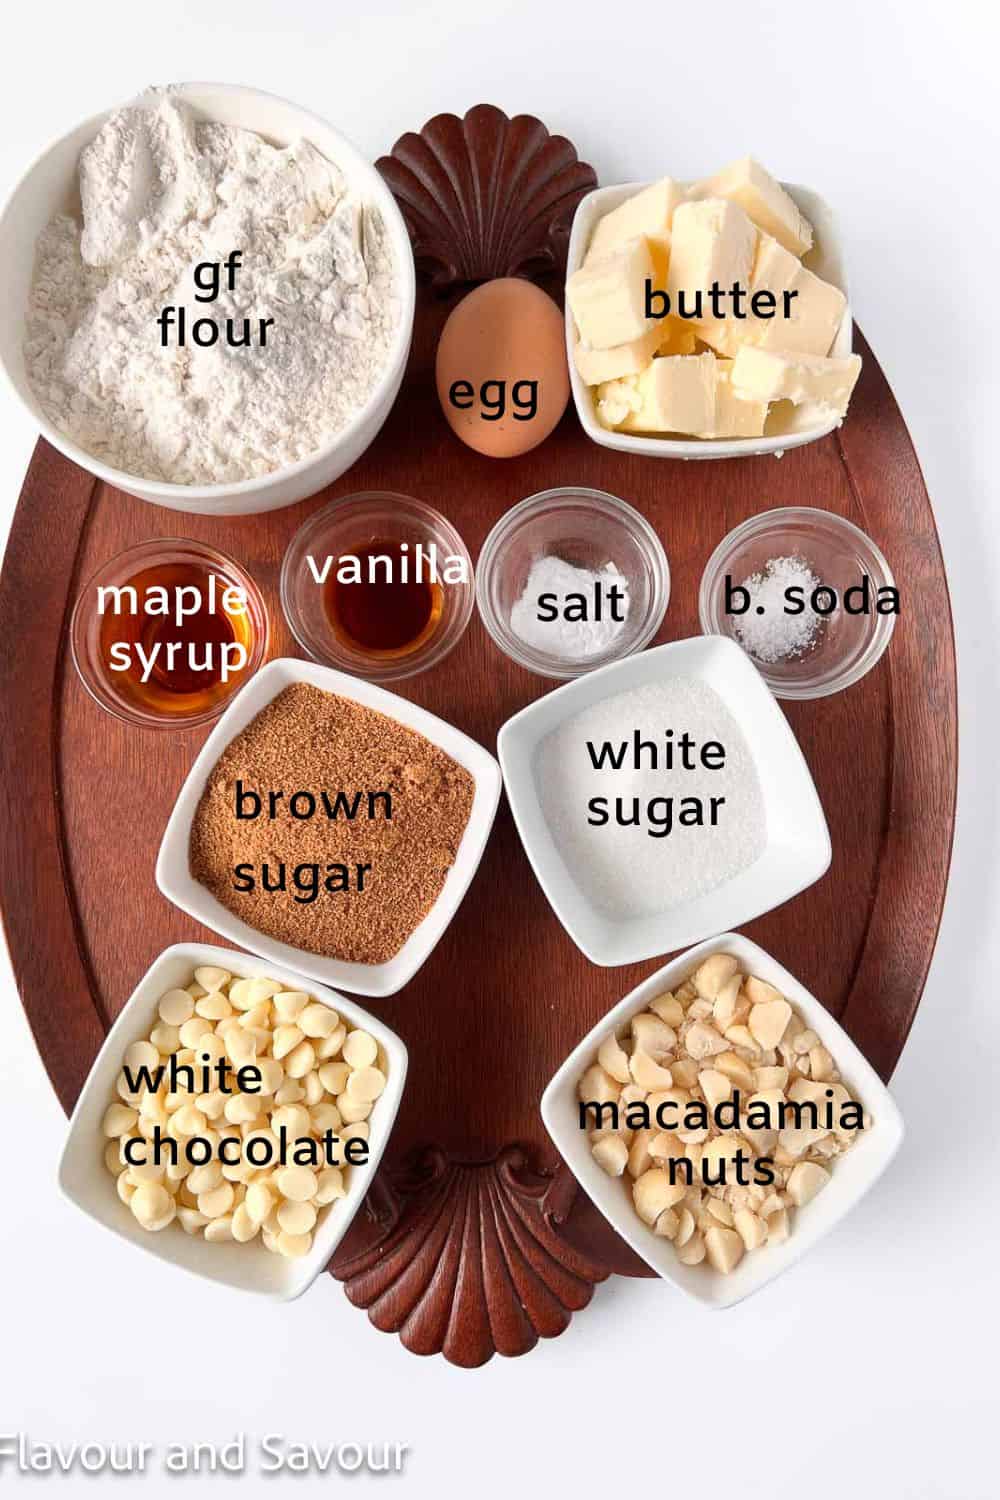 Ingredients for white chocolate macadamia nut cookies: gf flour, egg, butter, brown sugar, white sugar, maple syrup, vanilla, salt, baking soda, white chocolate and macadamia nuts.